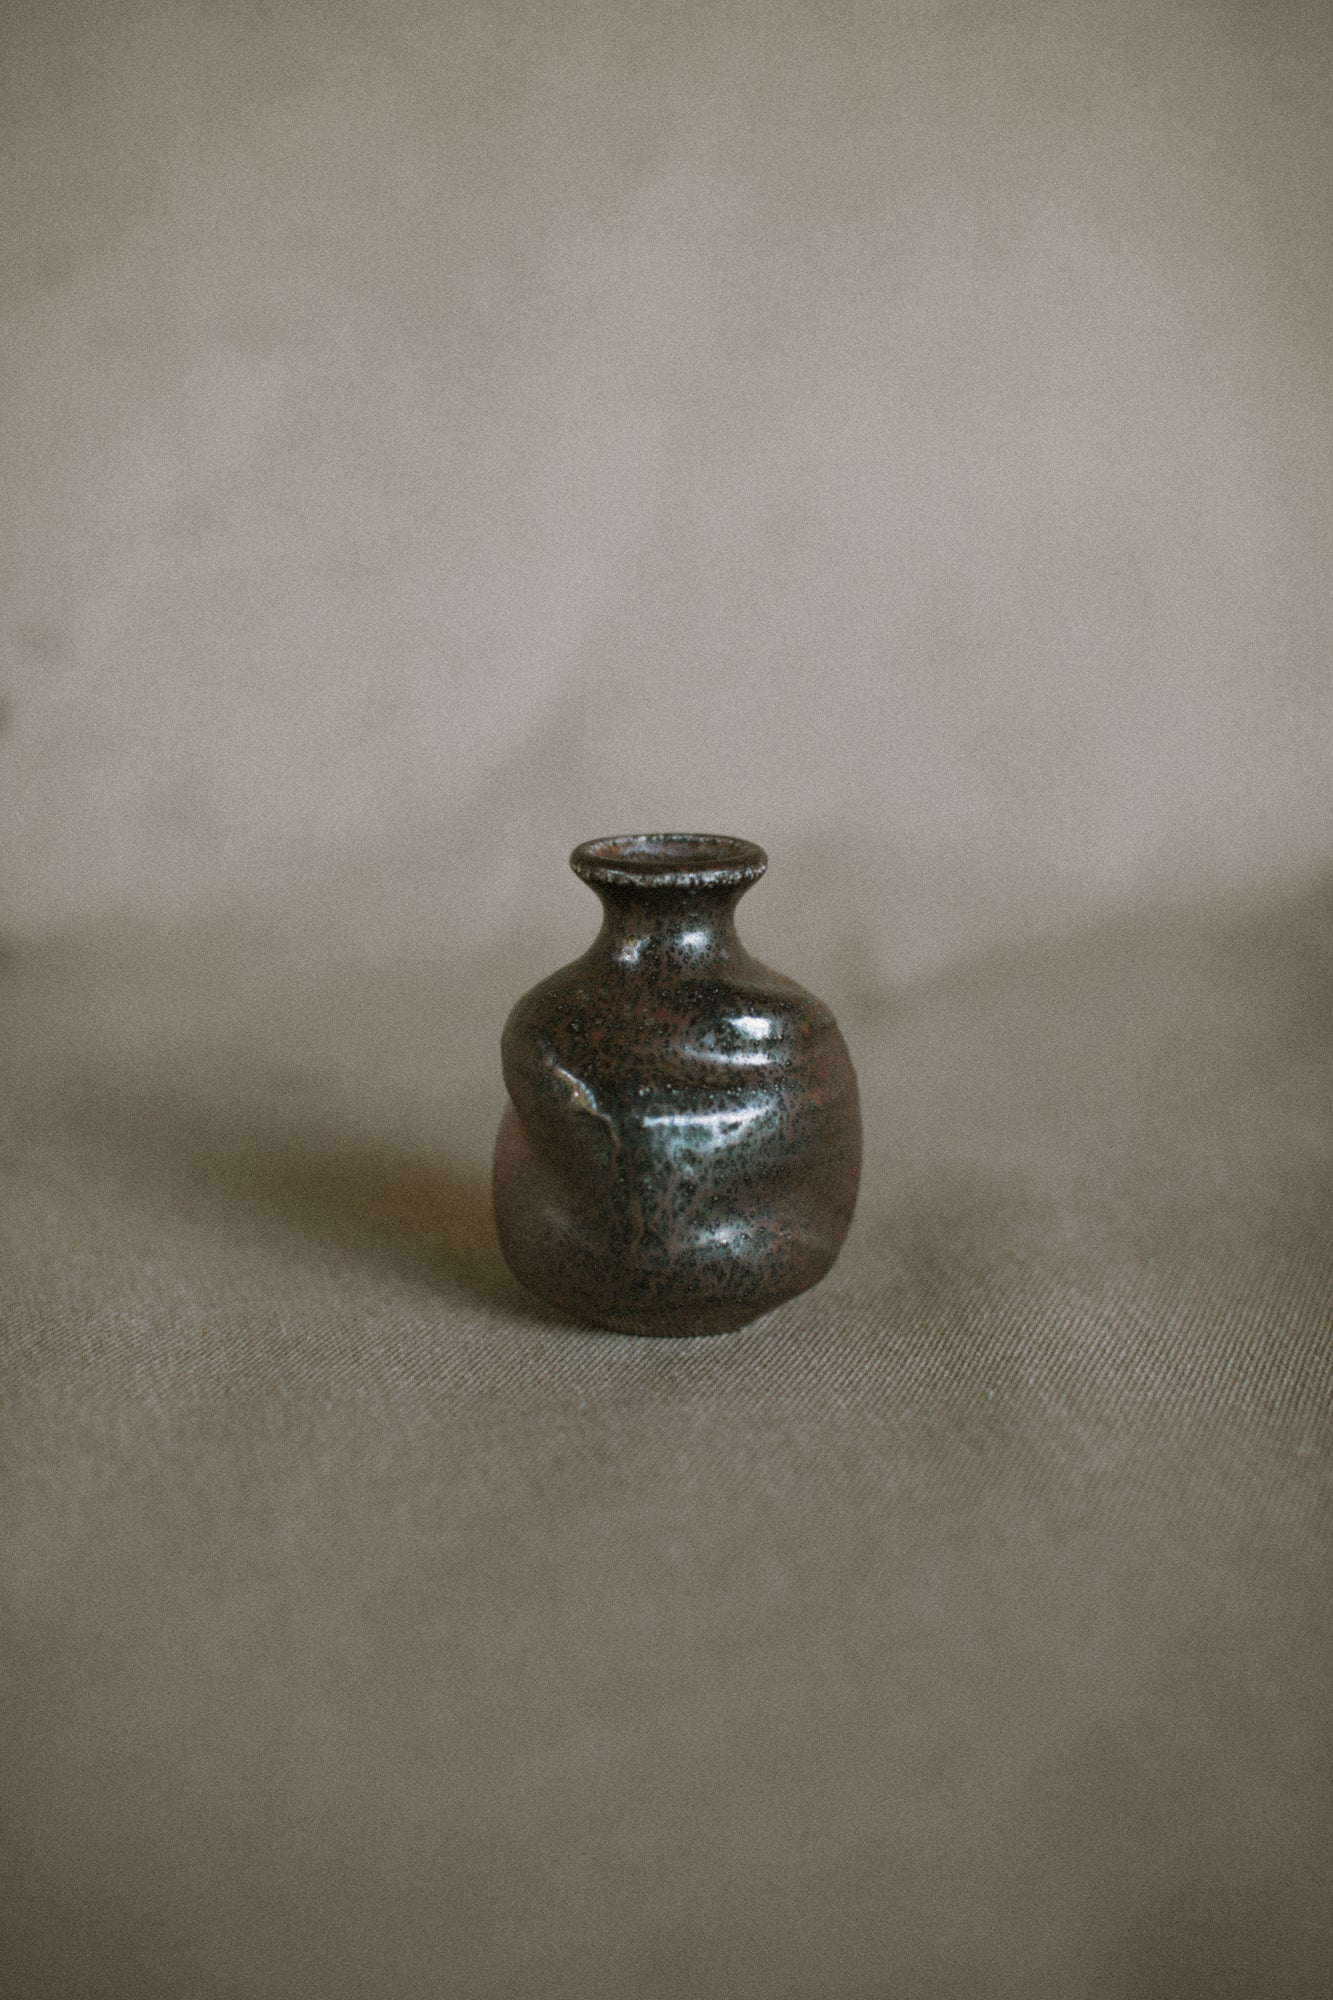 A small brown and black bud vase on a beige fabric background. The piece is made from Iron rich Australian stoneware clay wood ash covering one side.